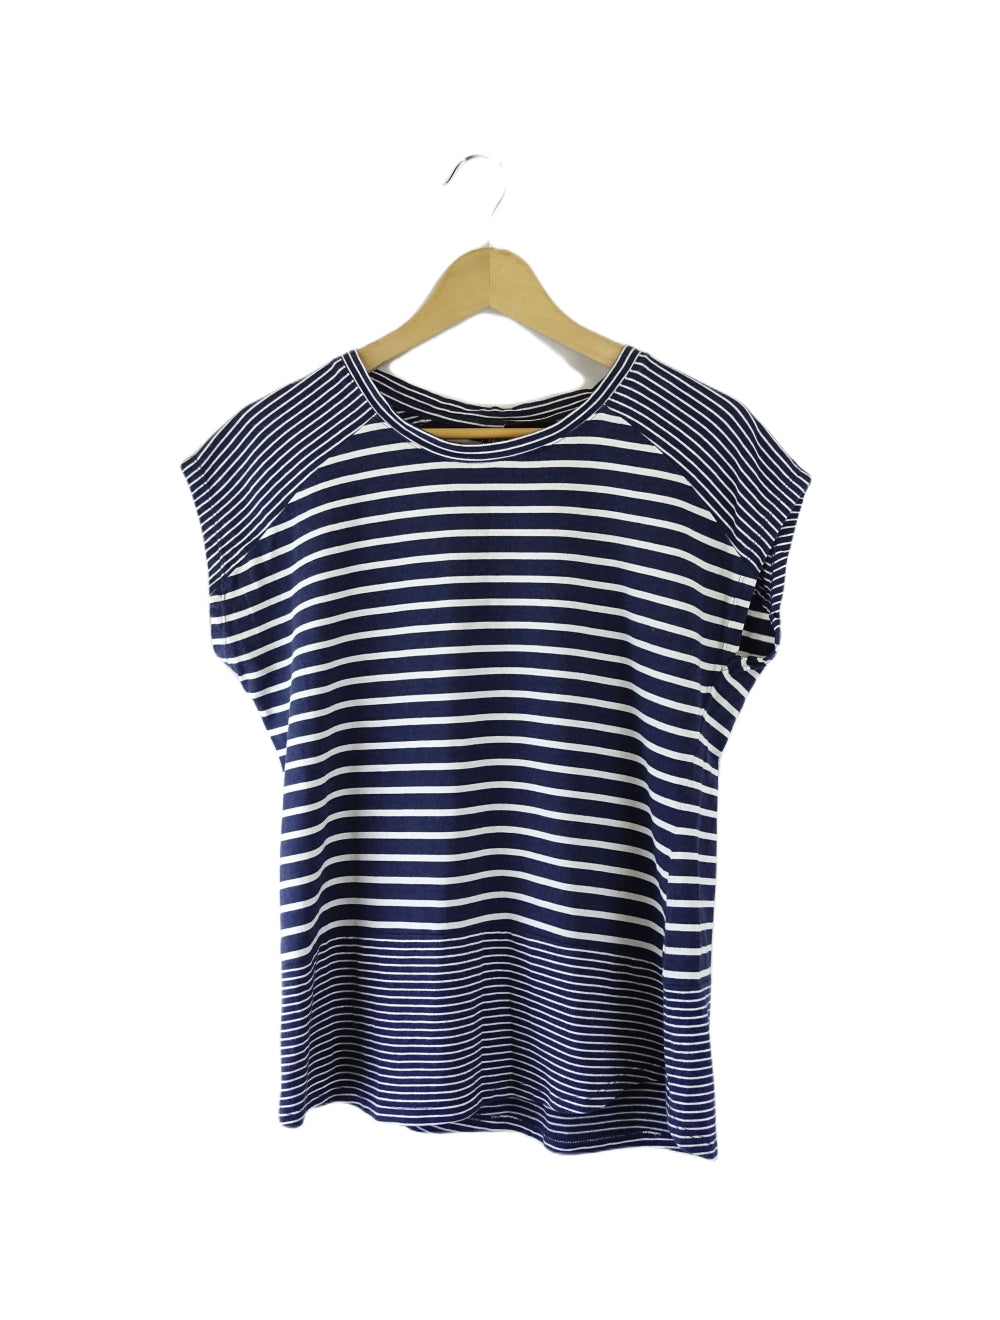 Jeanswest Blue And White Striped T-shirt S